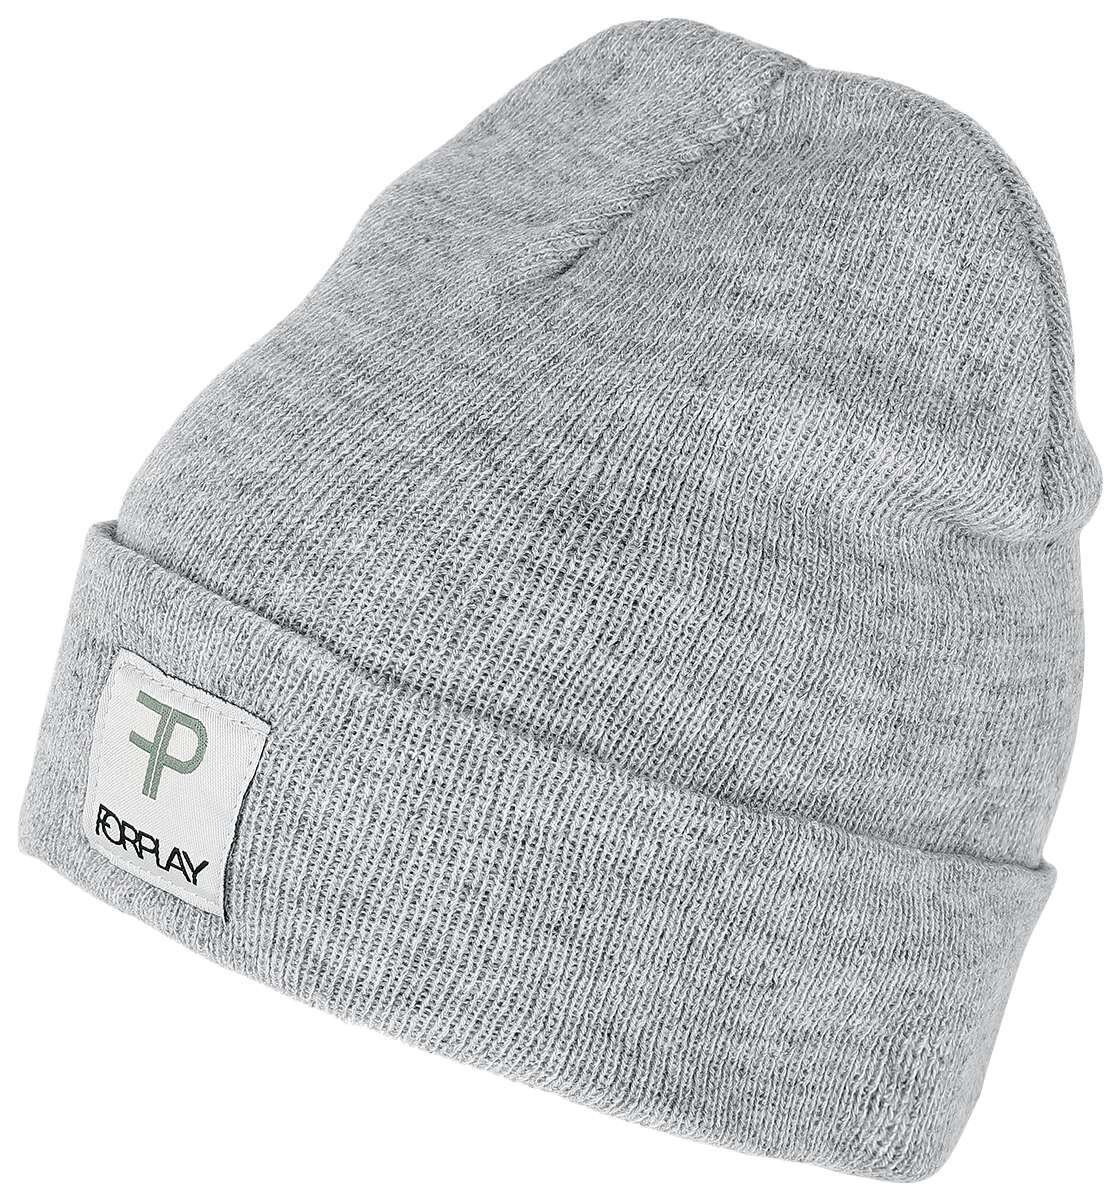 Image of Beanie di Forplay - Lucky - Unisex - grigio sport